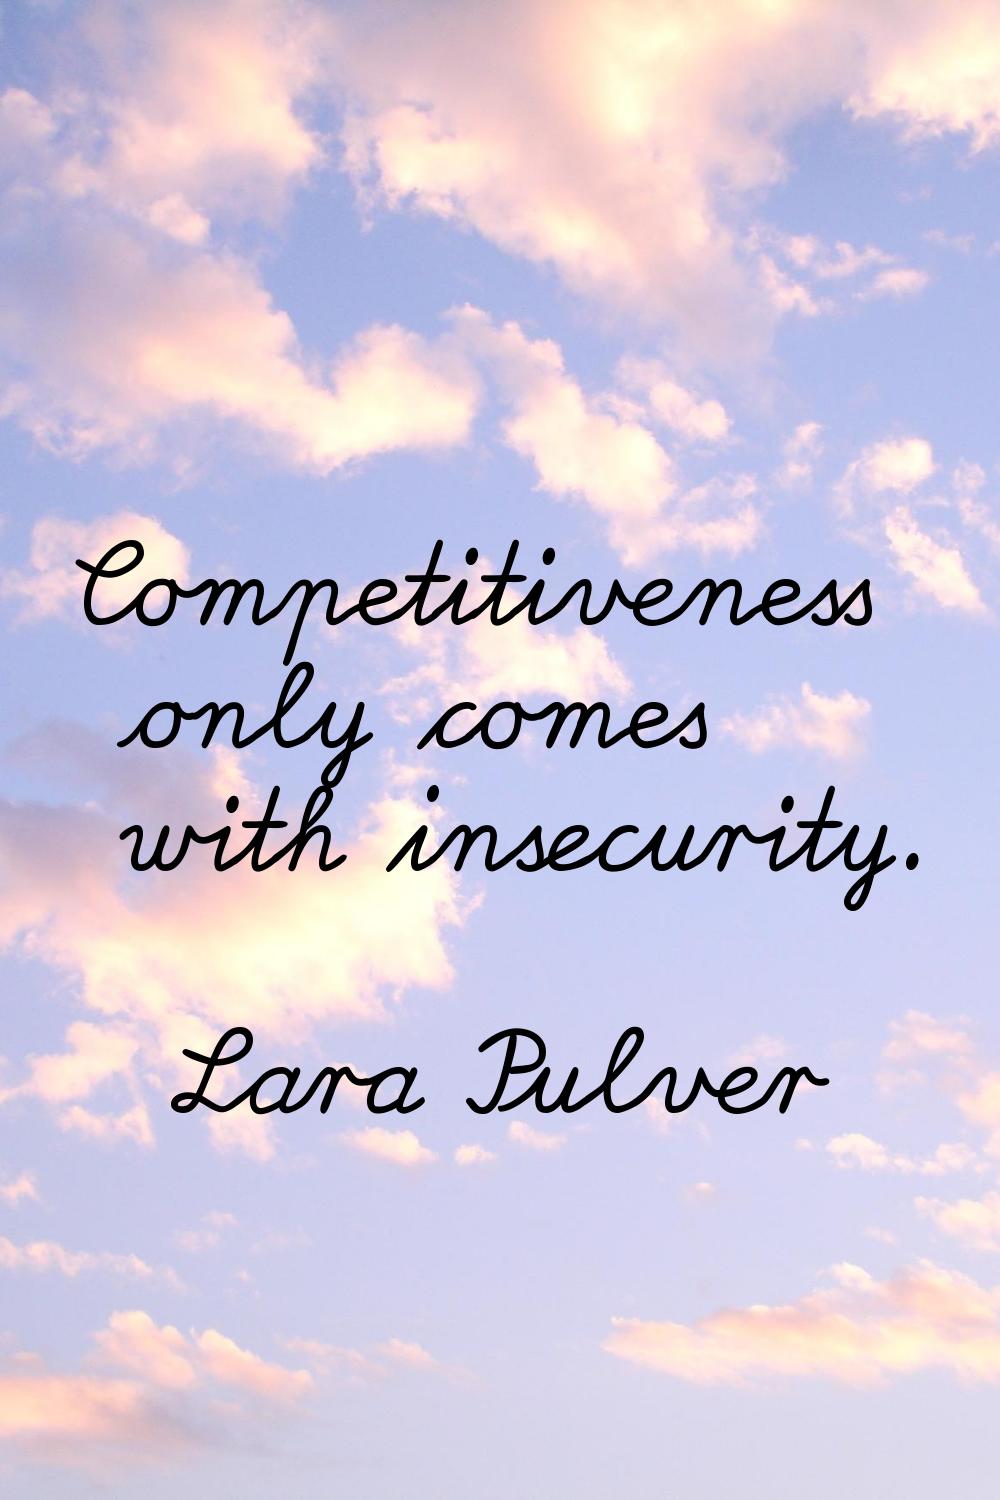 Competitiveness only comes with insecurity.